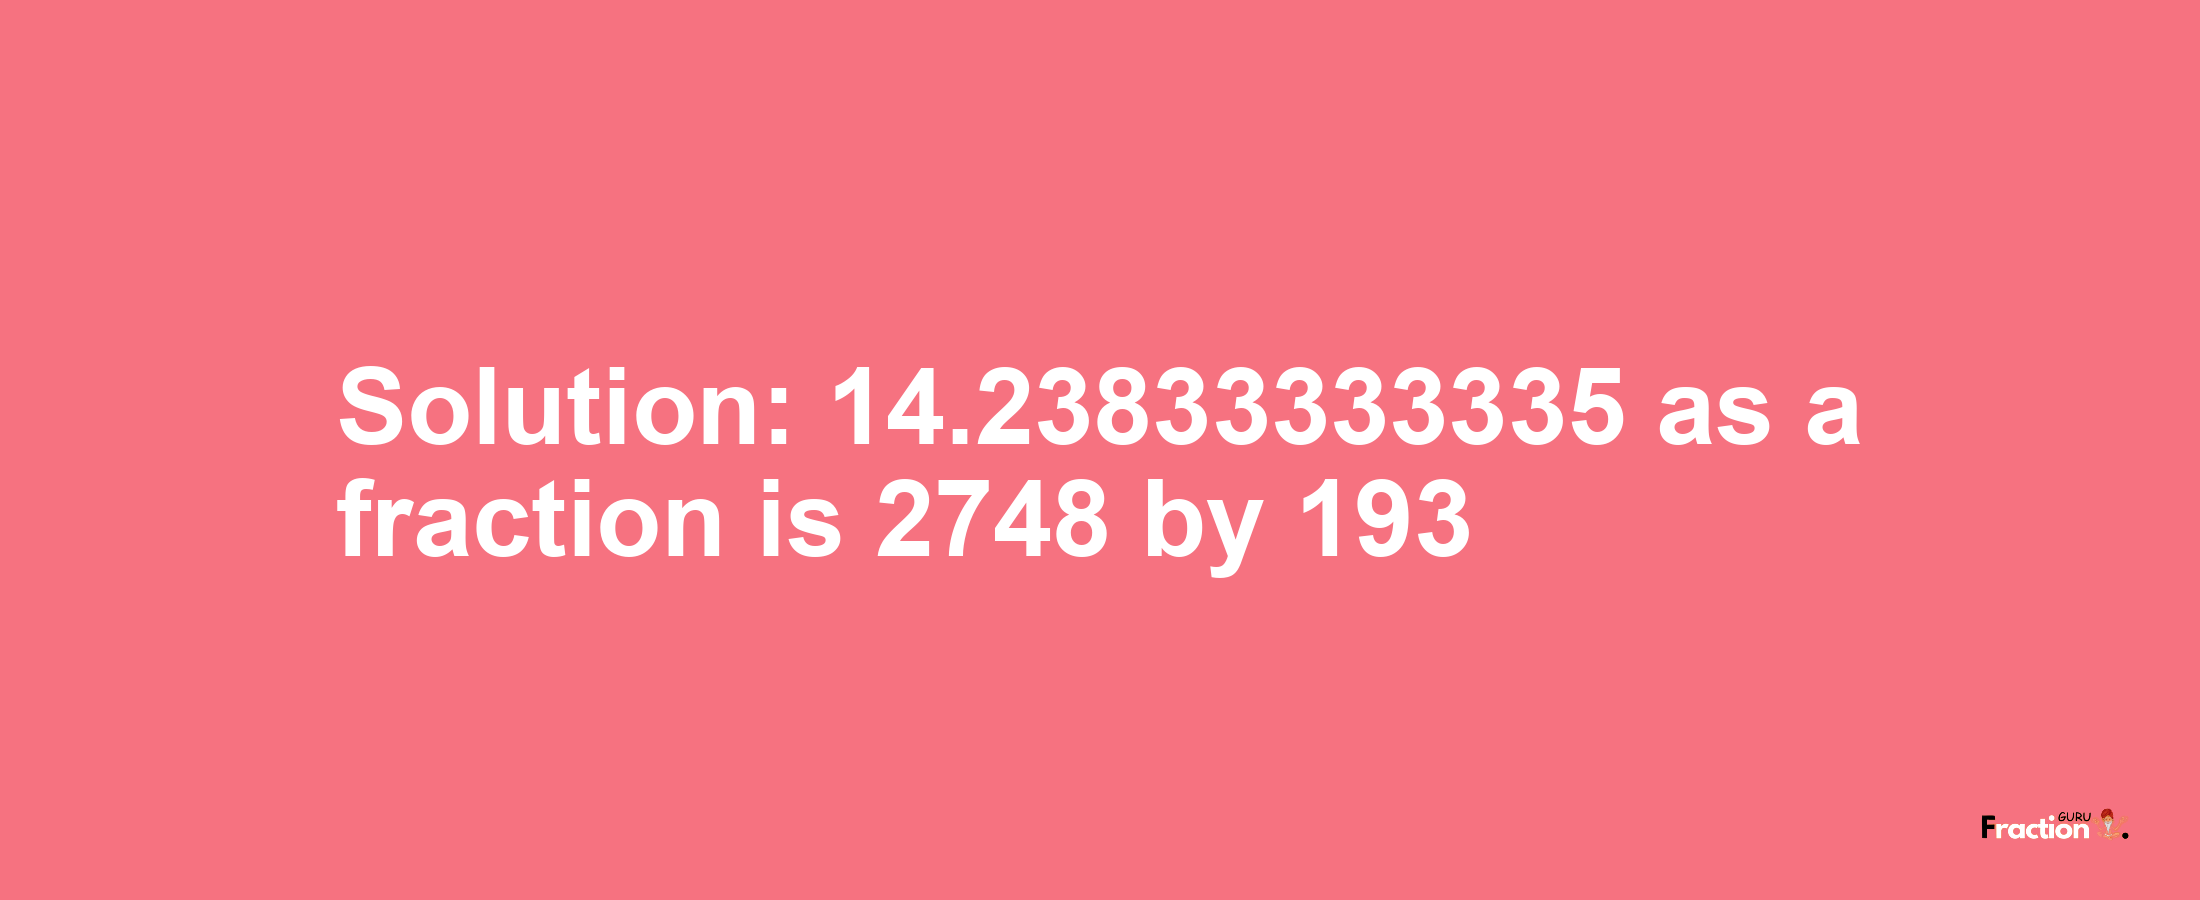 Solution:14.23833333335 as a fraction is 2748/193